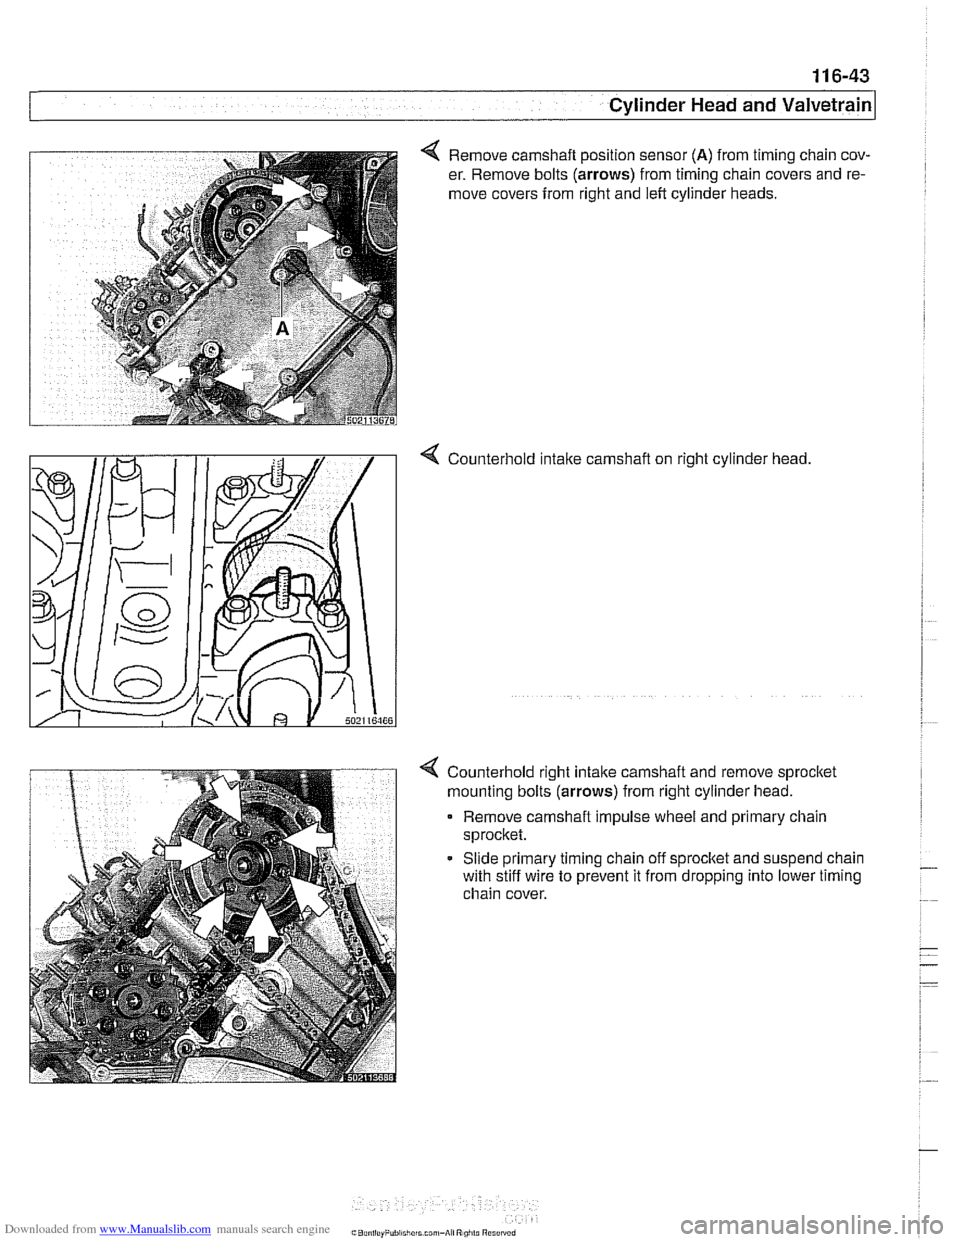 BMW 525i 2000 E39 Workshop Manual Downloaded from www.Manualslib.com manuals search engine 
Cylinder Head and valvetrain1 
4 Remove camshaft position sensor (A) from timing chain cov- 
er.  Remove bolts 
(arrows) from timing chain cov